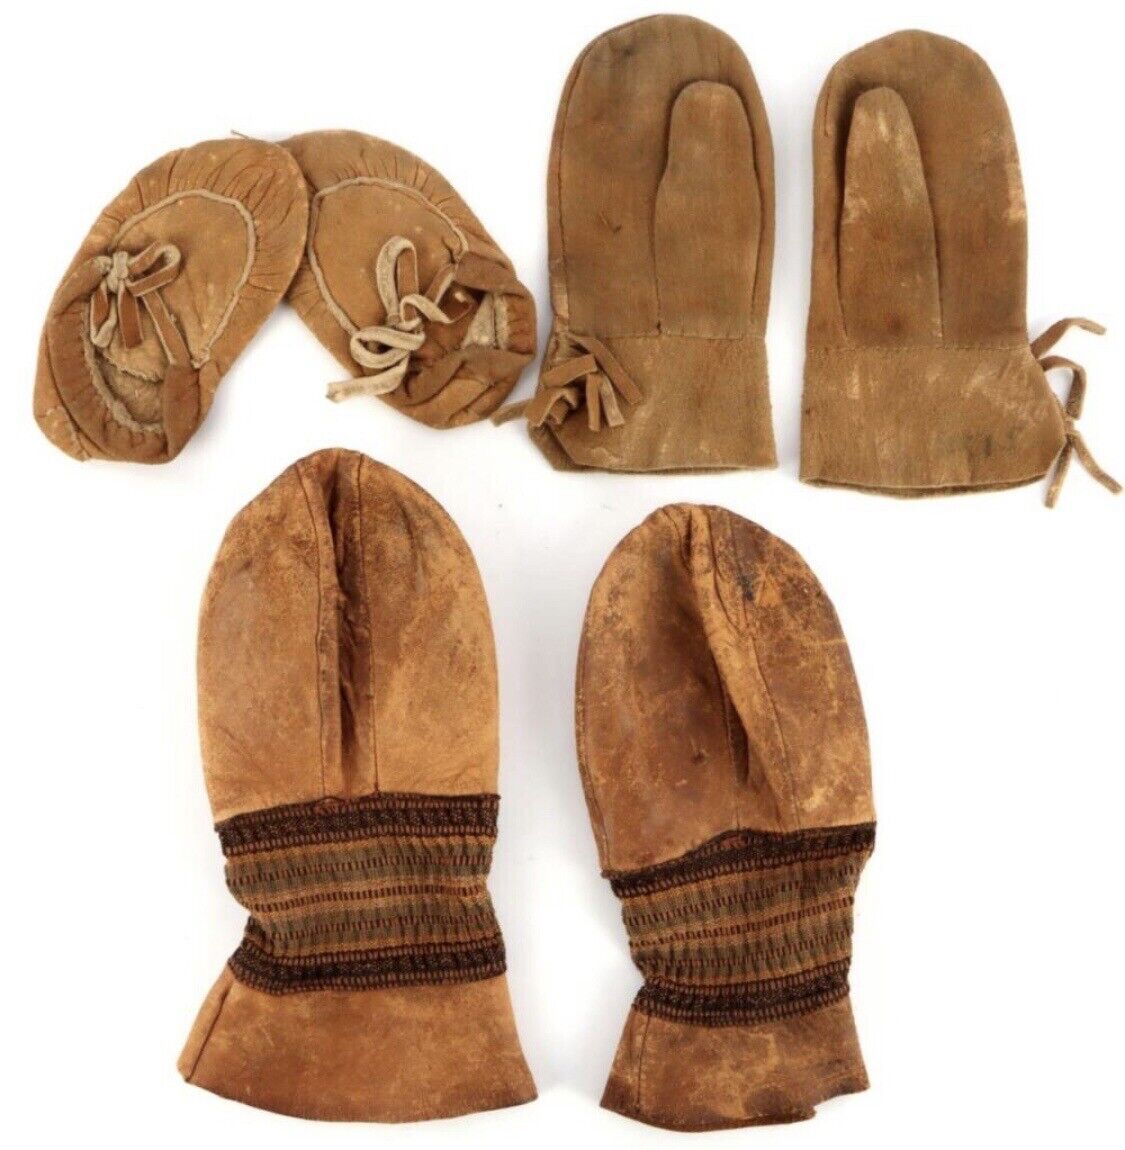 Original 1800’s Native American Plains Indian Child Moccasins And Mittens